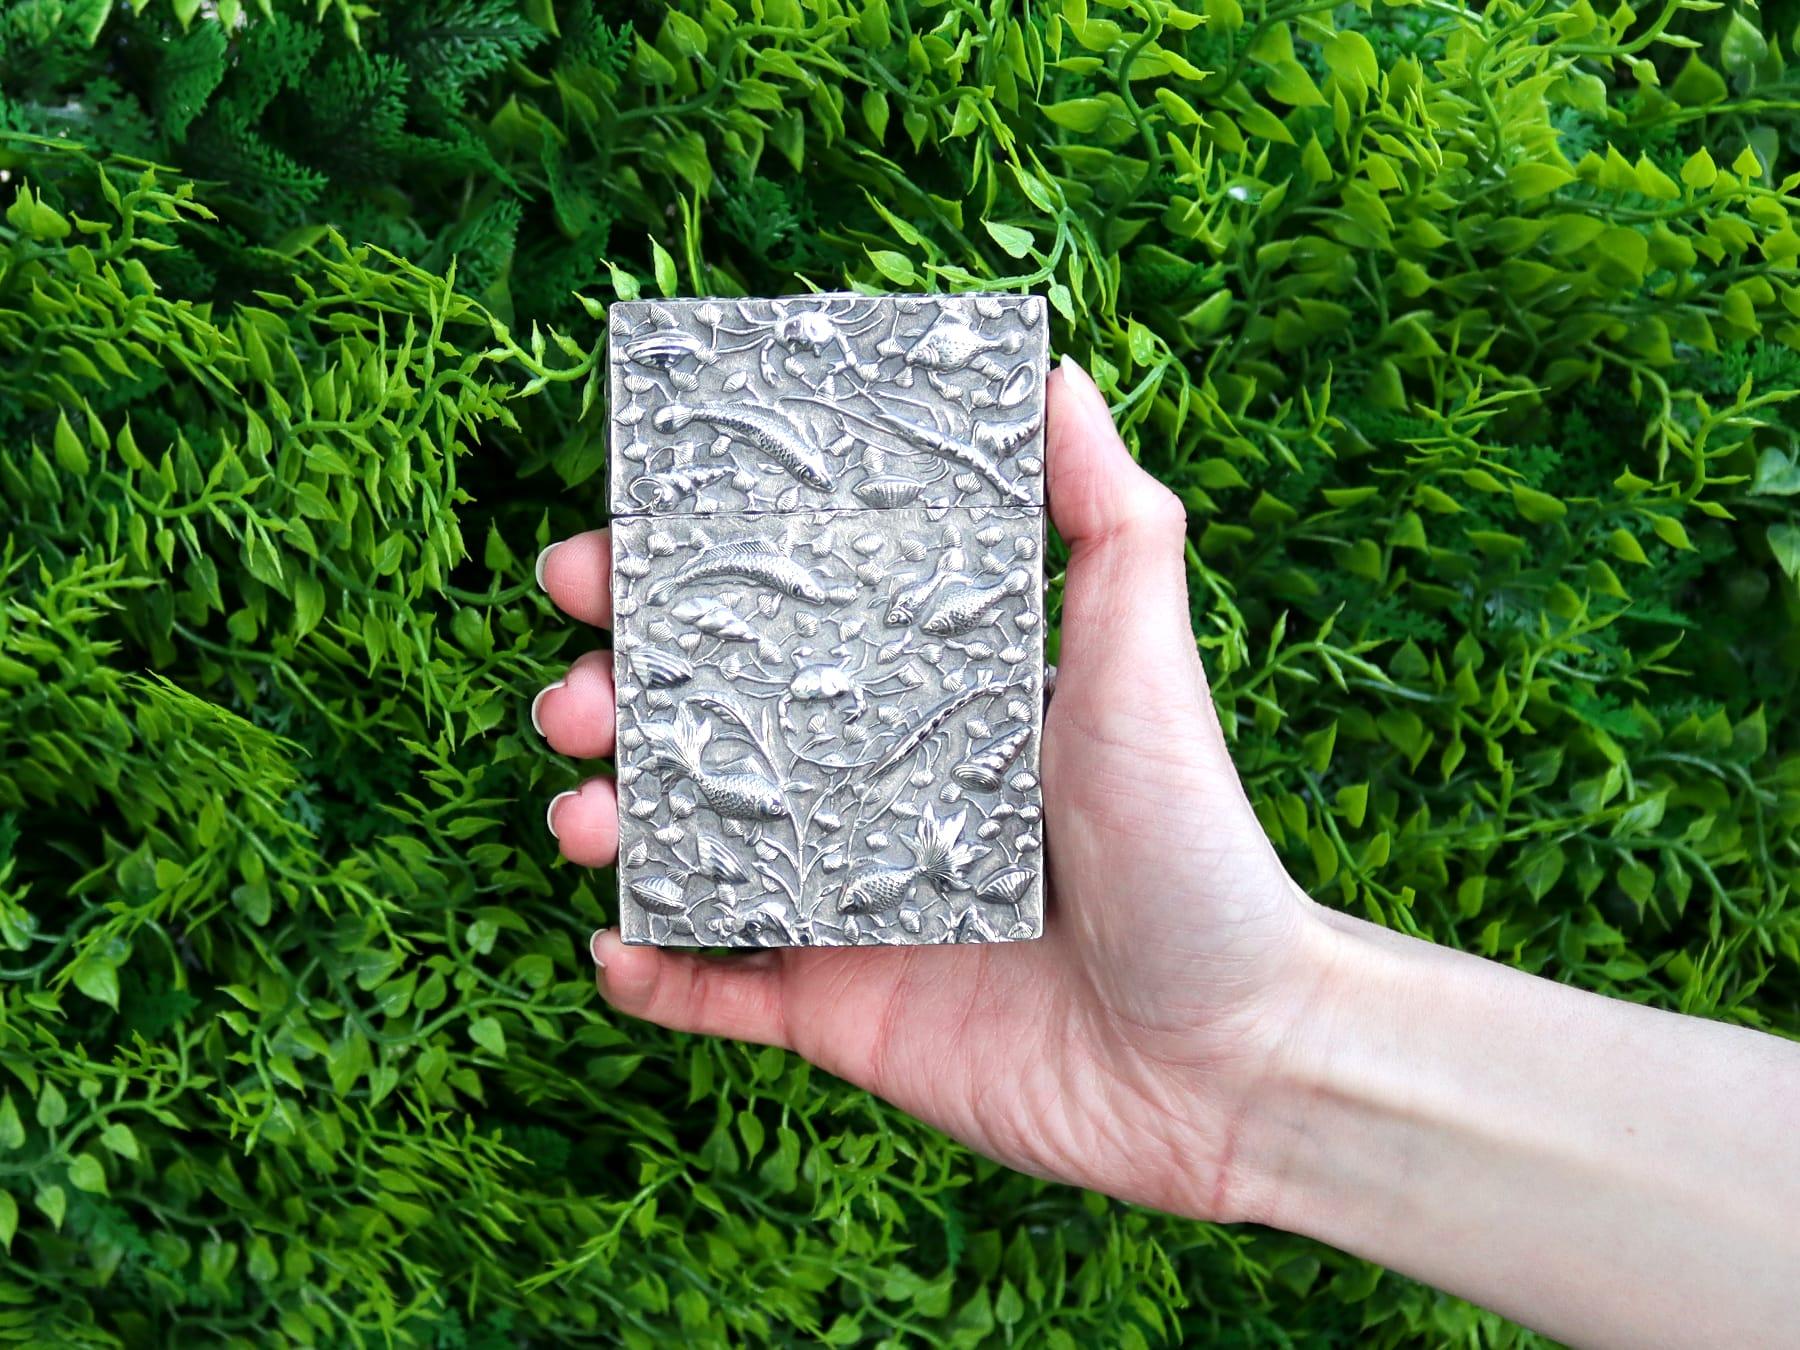 An exceptional, fine and impressive antique Chinese export silver card case; part of our diverse Asian silverware collection.

This exceptional antique Chinese export silver (CES) card case has a plain rectangular rounded form.

The anterior